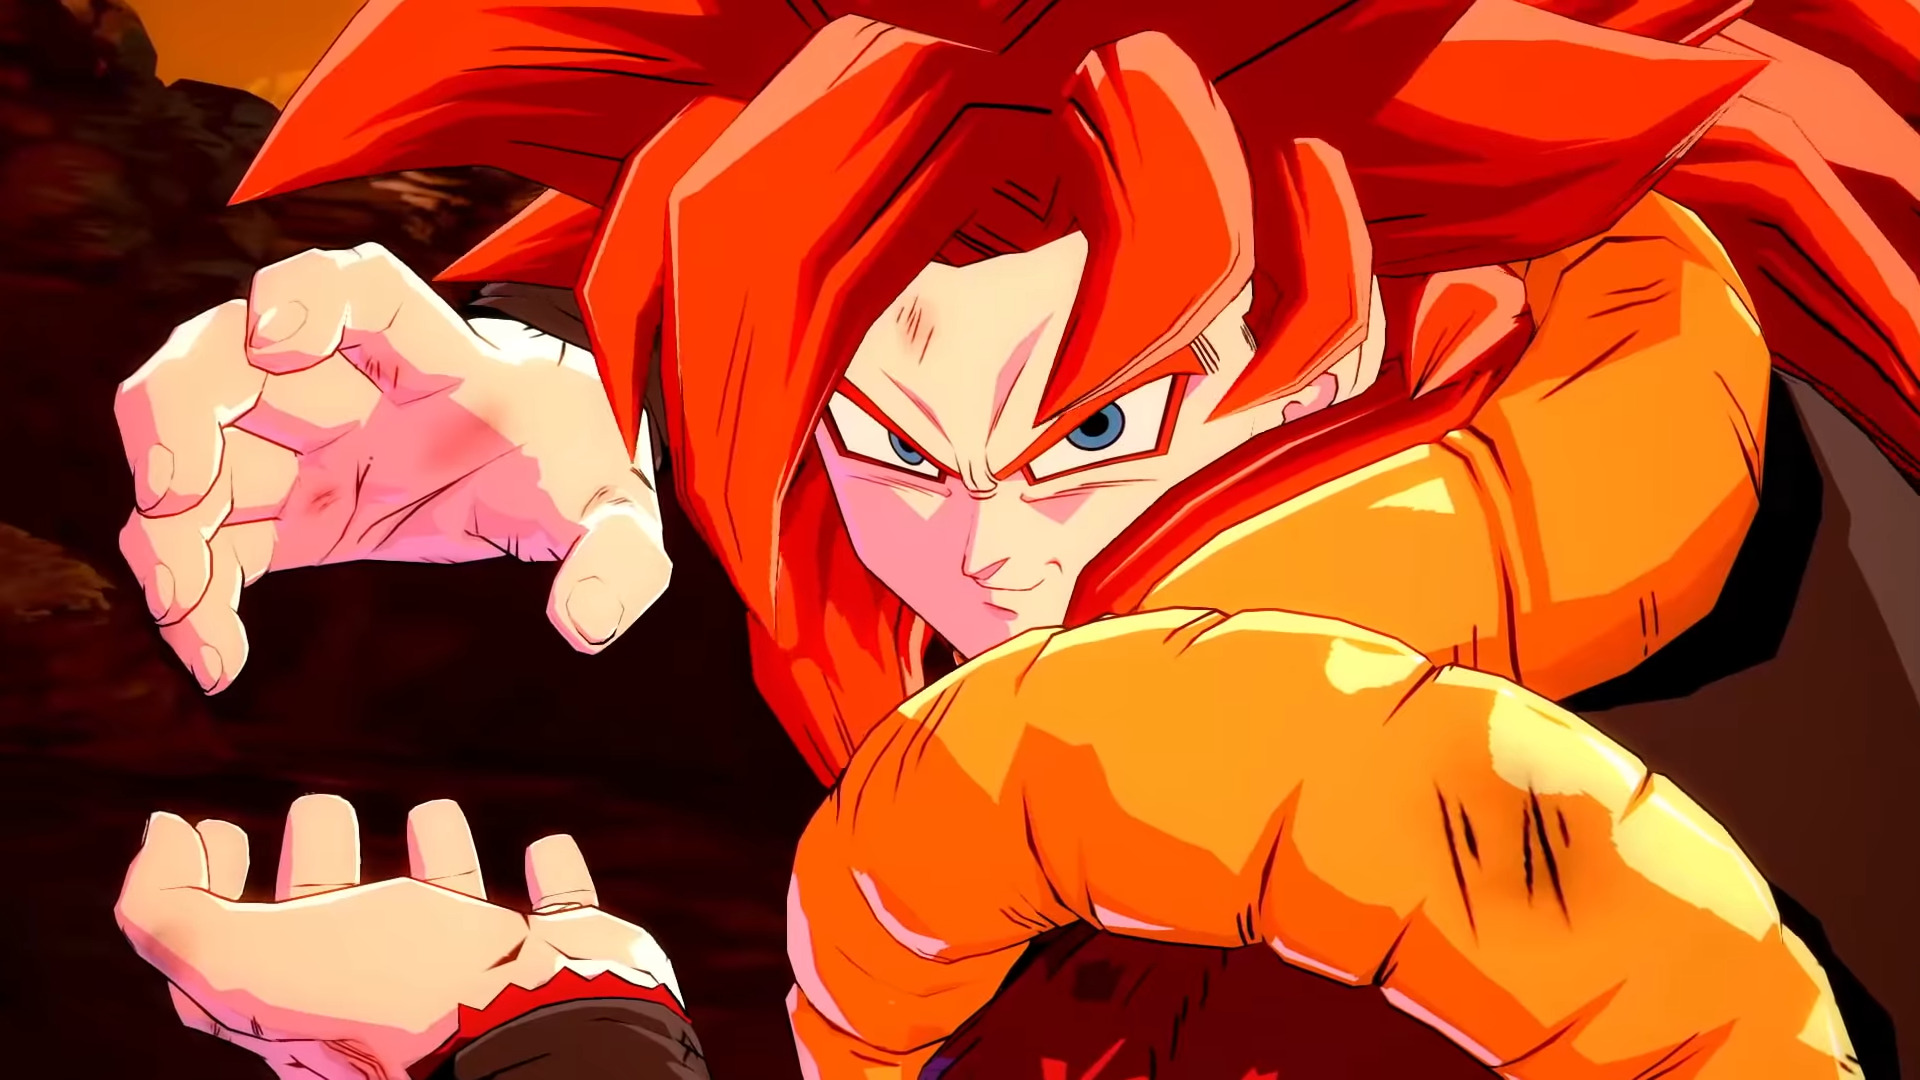 Gogeta SS4 is coming to Dragon Ball FighterZ later this week